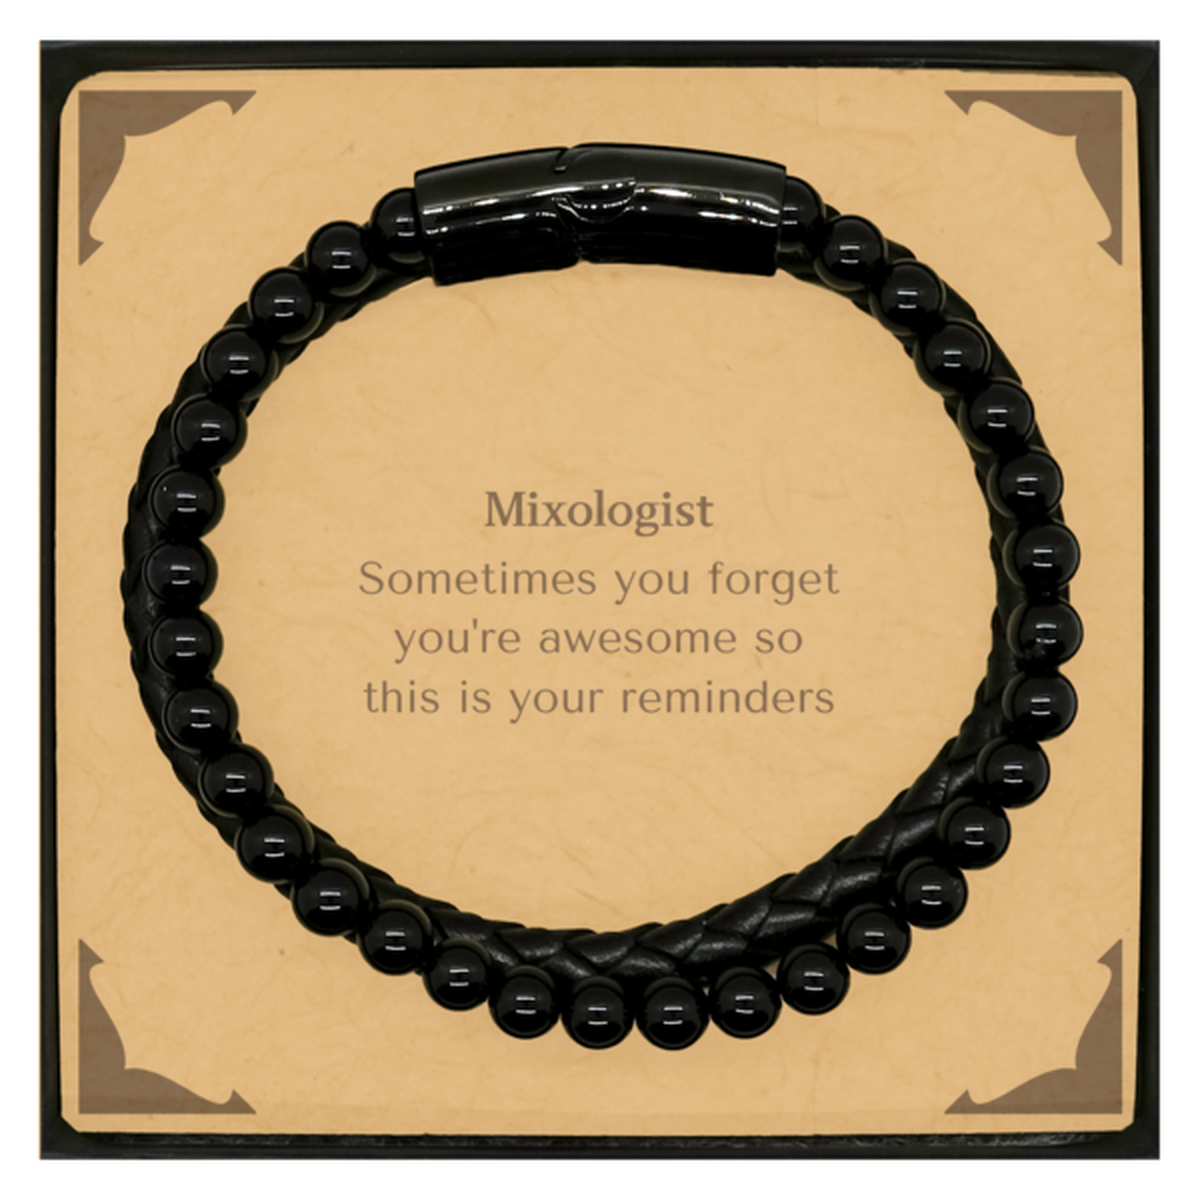 Sentimental Mixologist Stone Leather Bracelets, Mixologist Sometimes you forget you're awesome so this is your reminders, Graduation Christmas Birthday Gifts for Mixologist, Men, Women, Coworkers